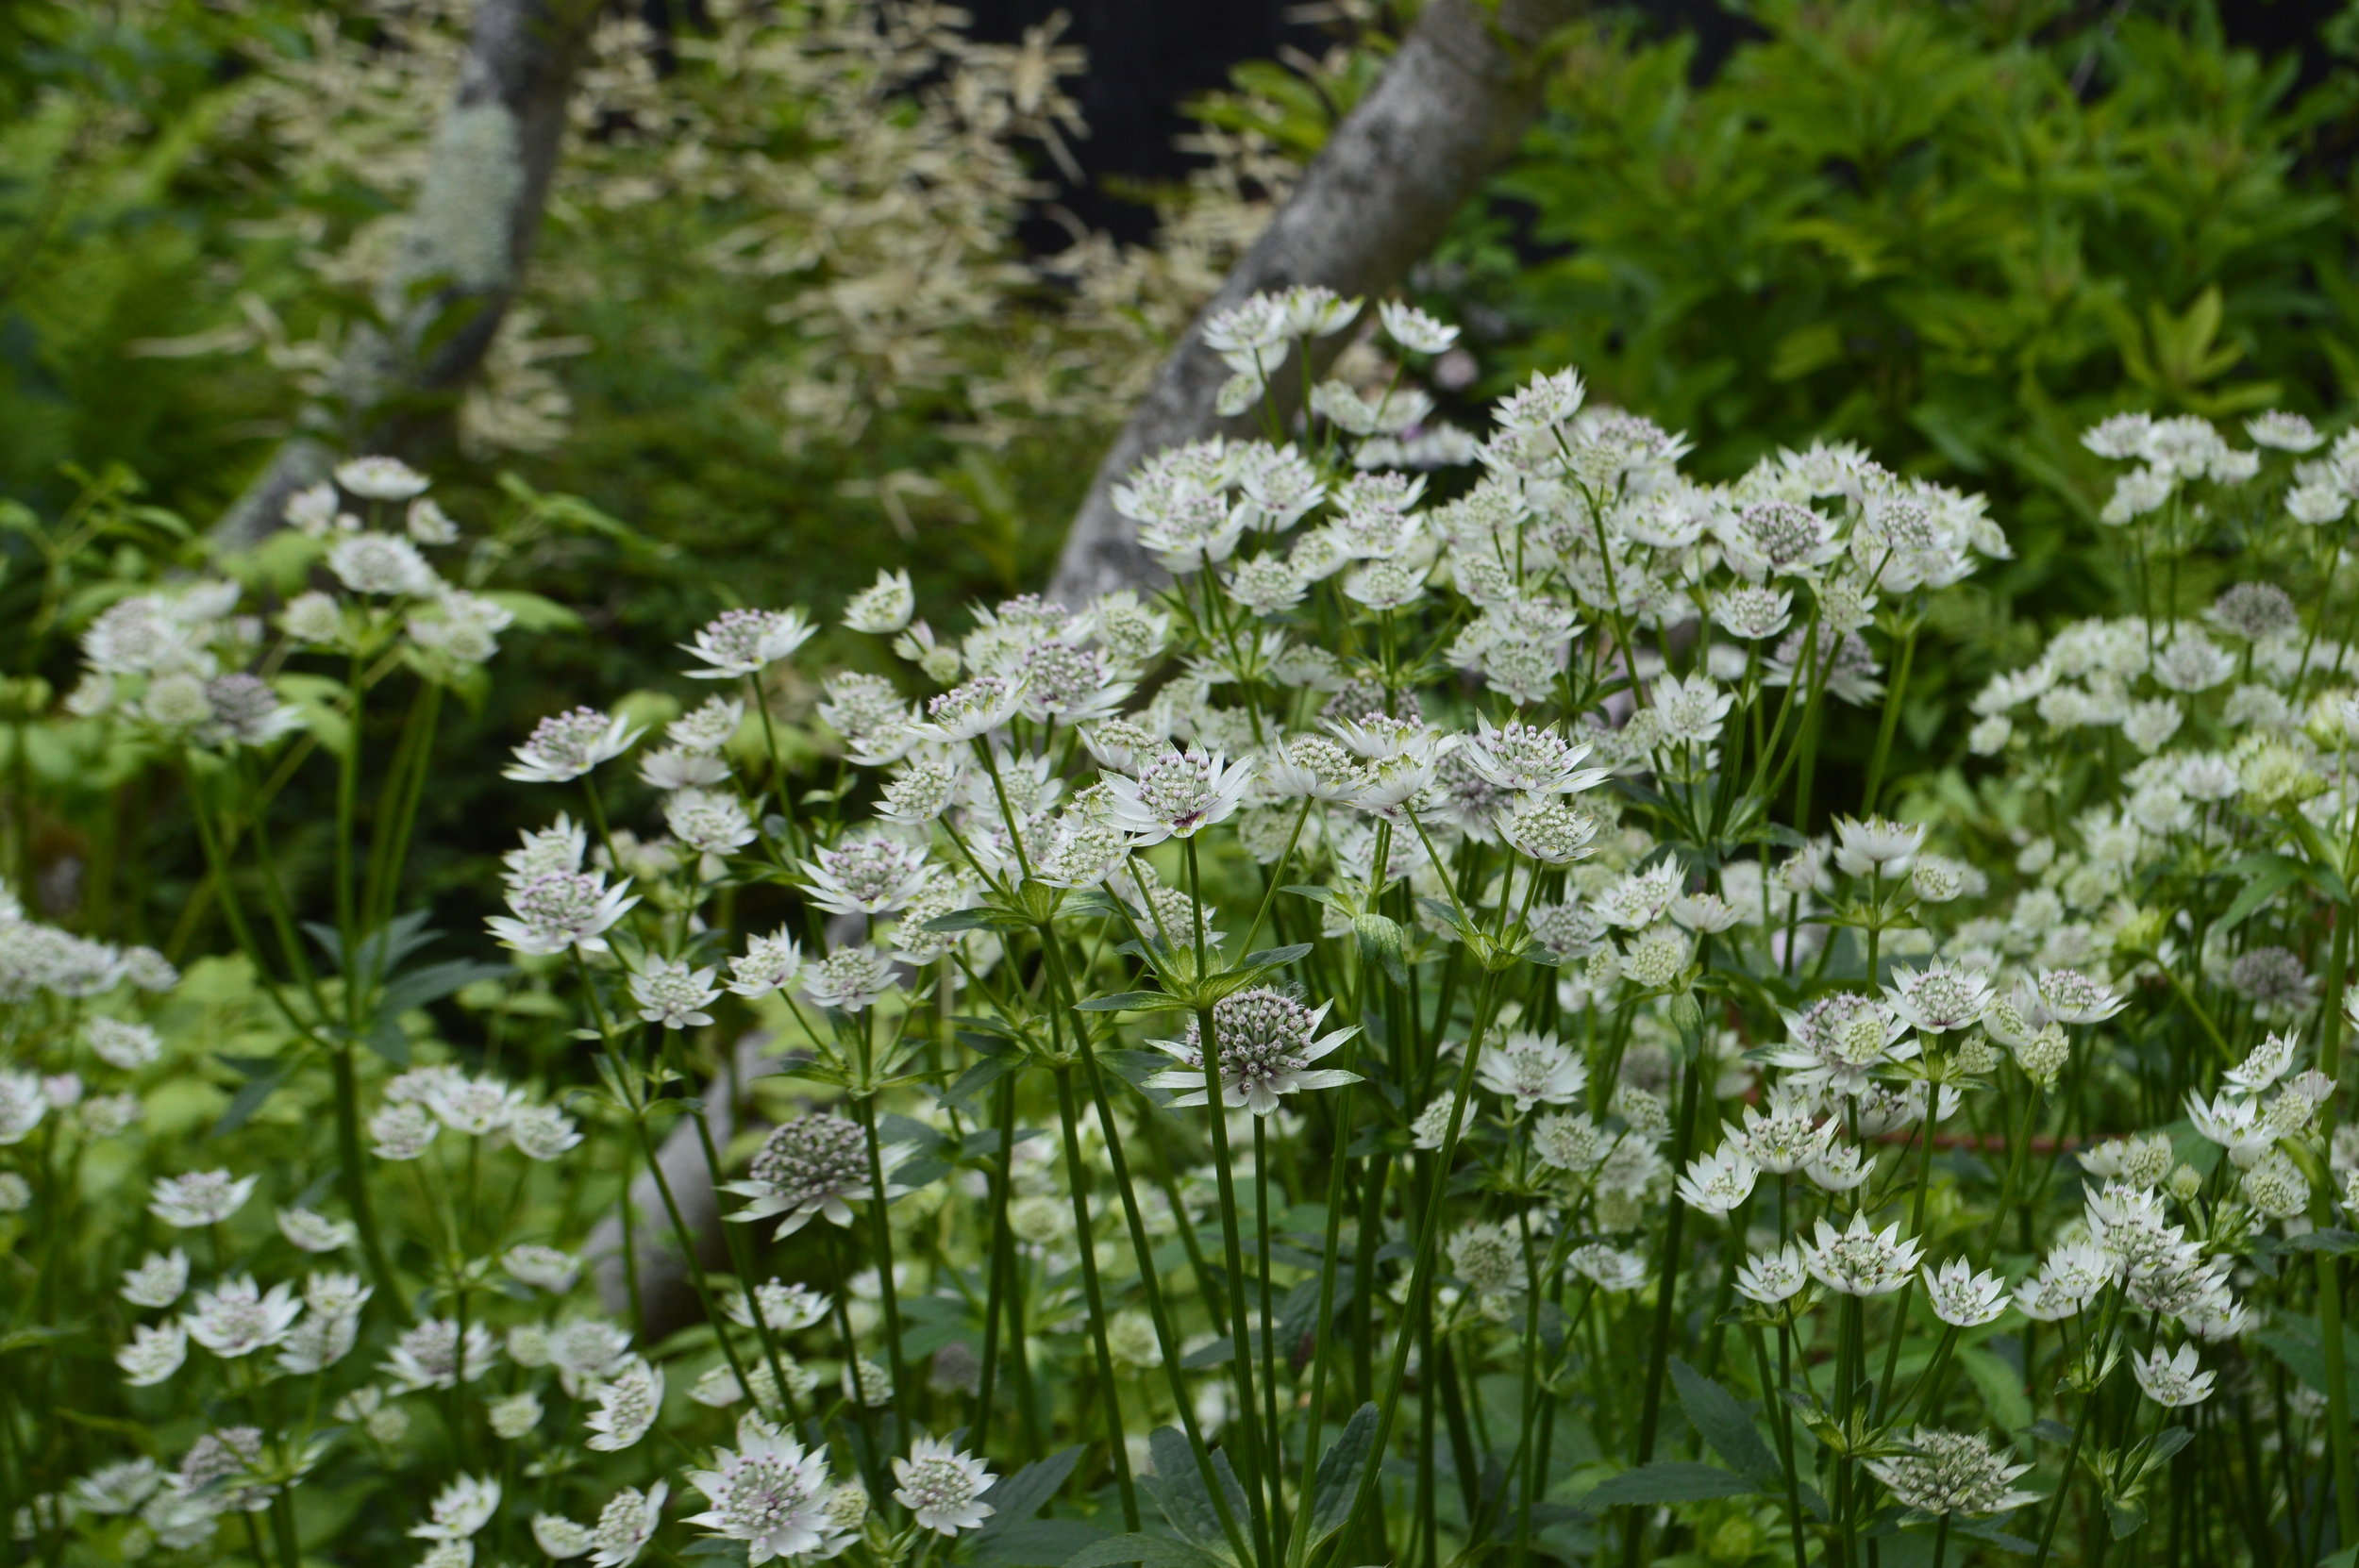 The White Garden - froth, buttons, plumes and green foliage allowing each plants to stand out